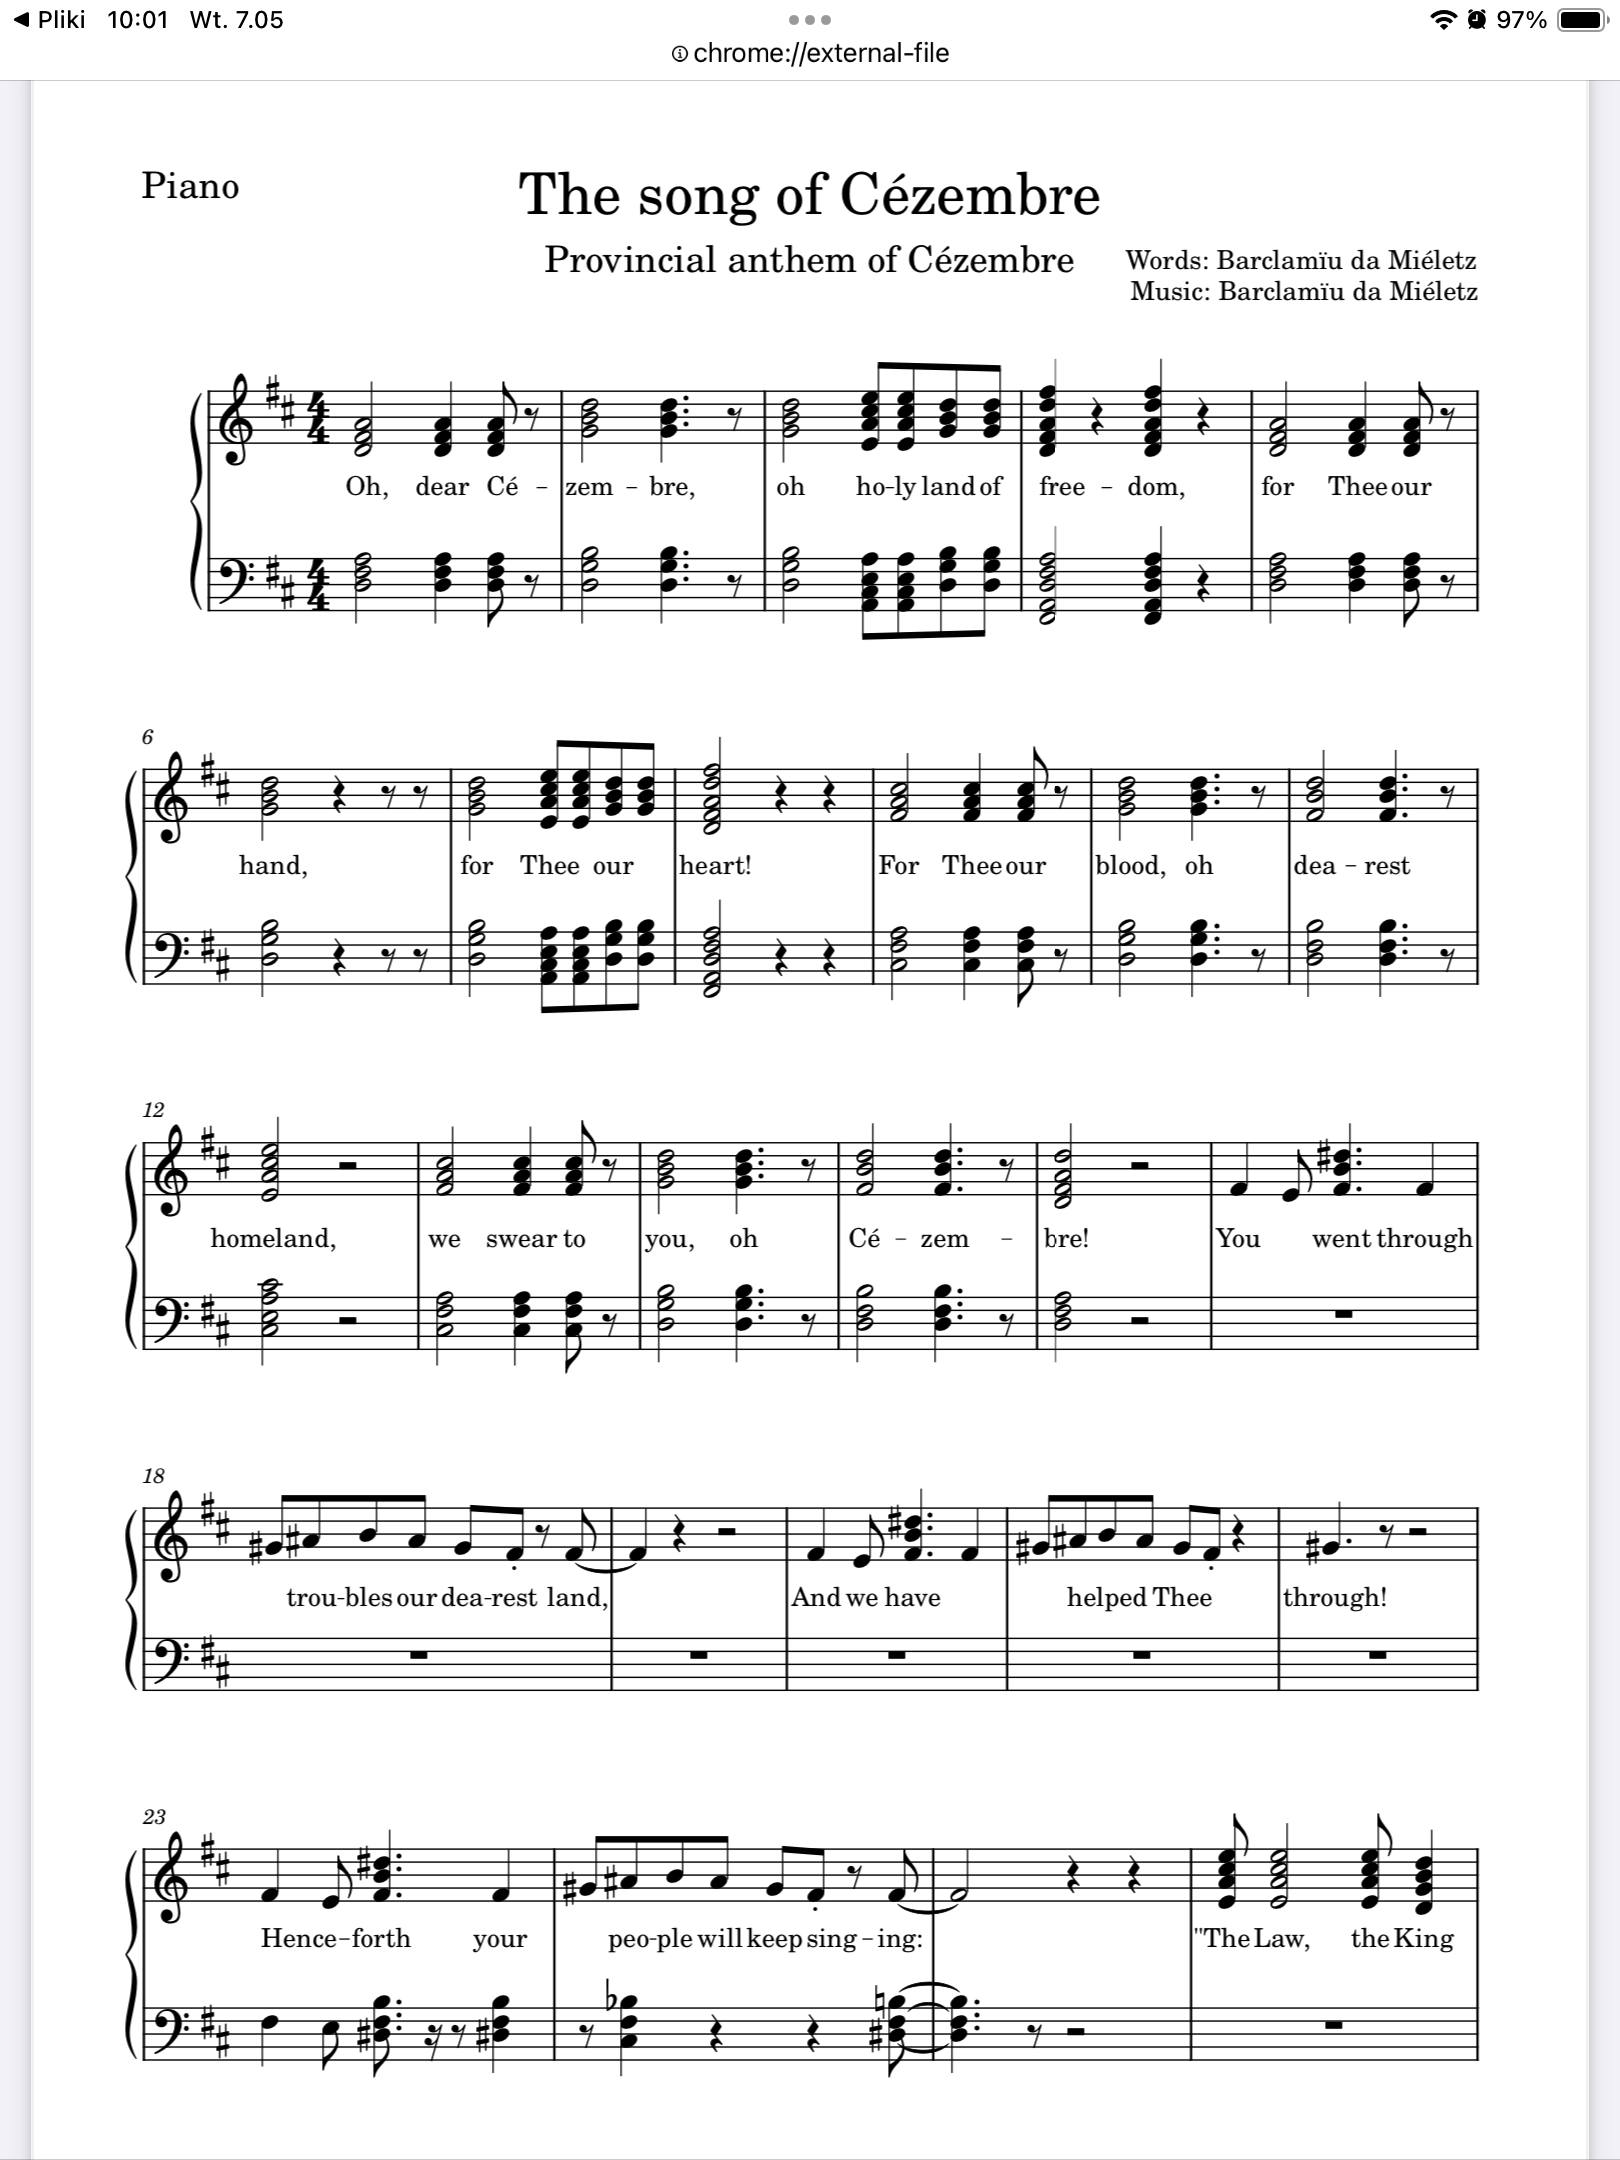 The song of Cézembre sheet music.png